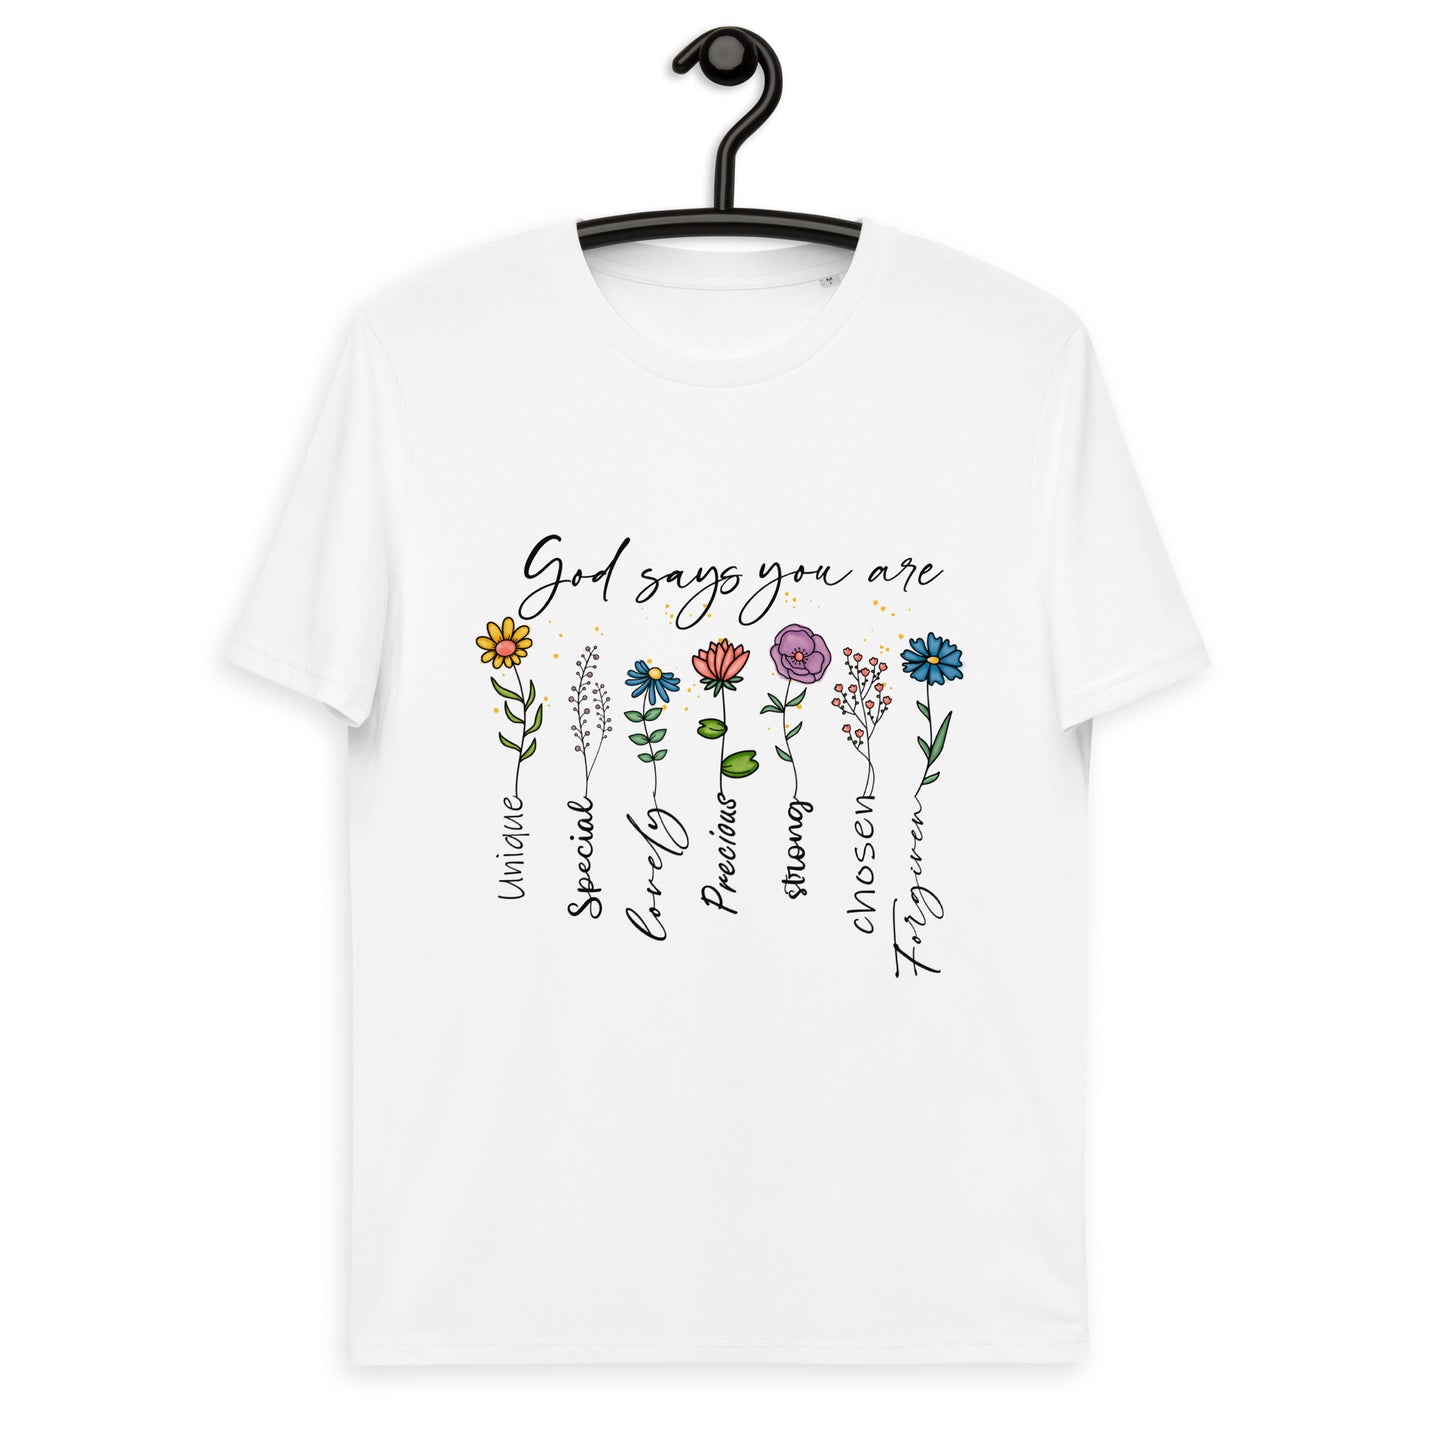 God Says You Are: Christian Sublimation T-Shirt